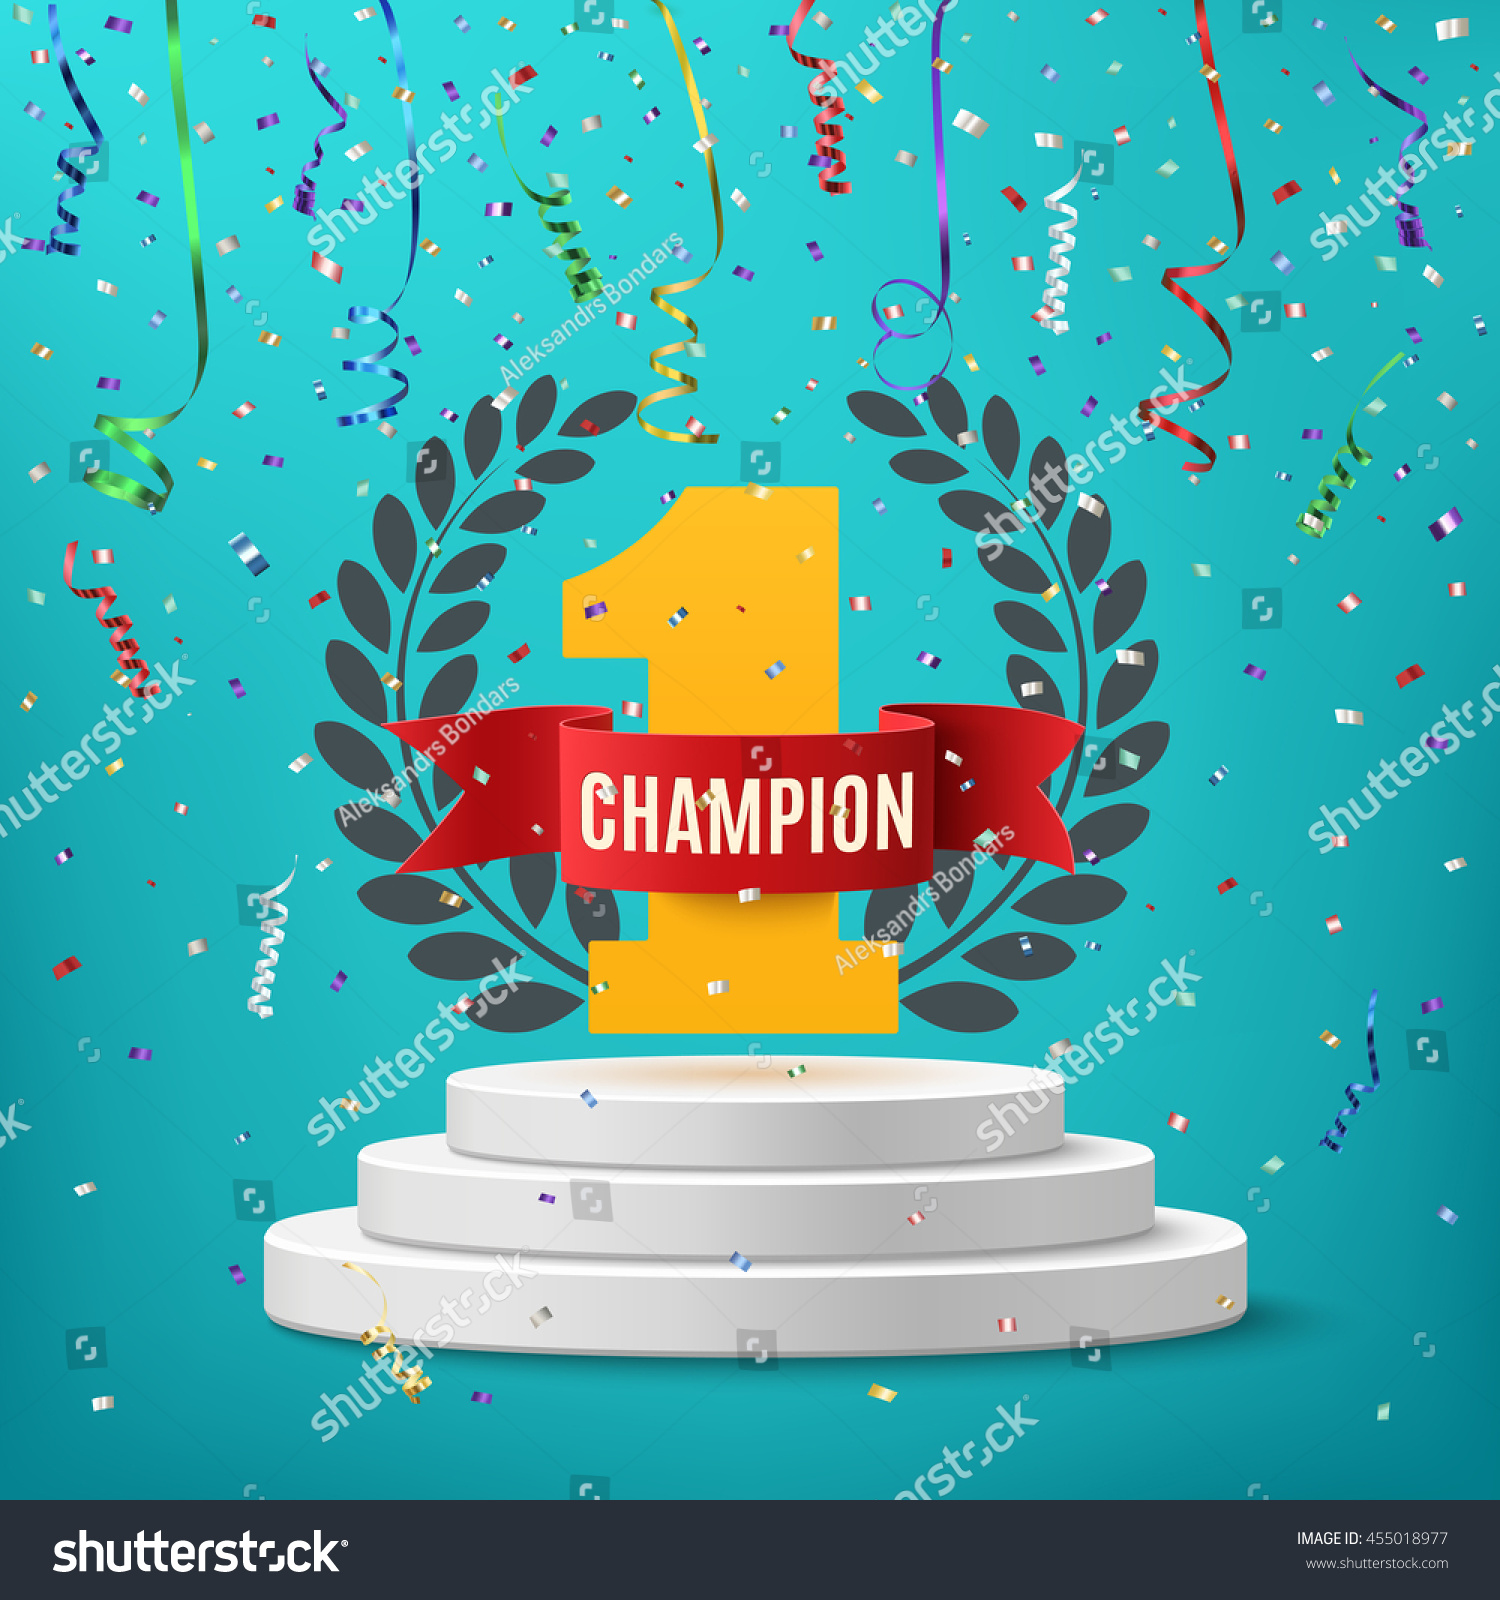 SVG of Champion, winner, number one background with red ribbon, olive branch  and confetti on round pedestal isolated on blue. Poster or brochure template. Vector illustration. svg